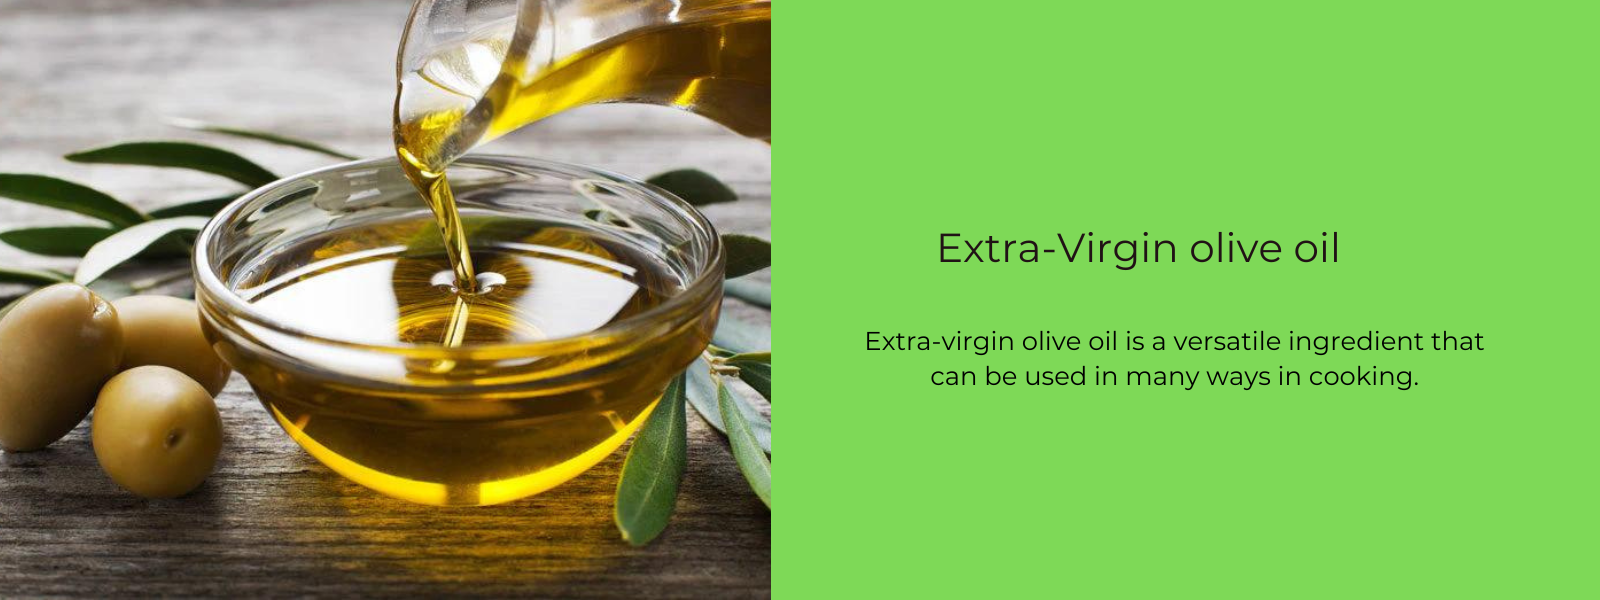 Extra-Virgin olive oil - Health Benefits, Uses and Important Facts